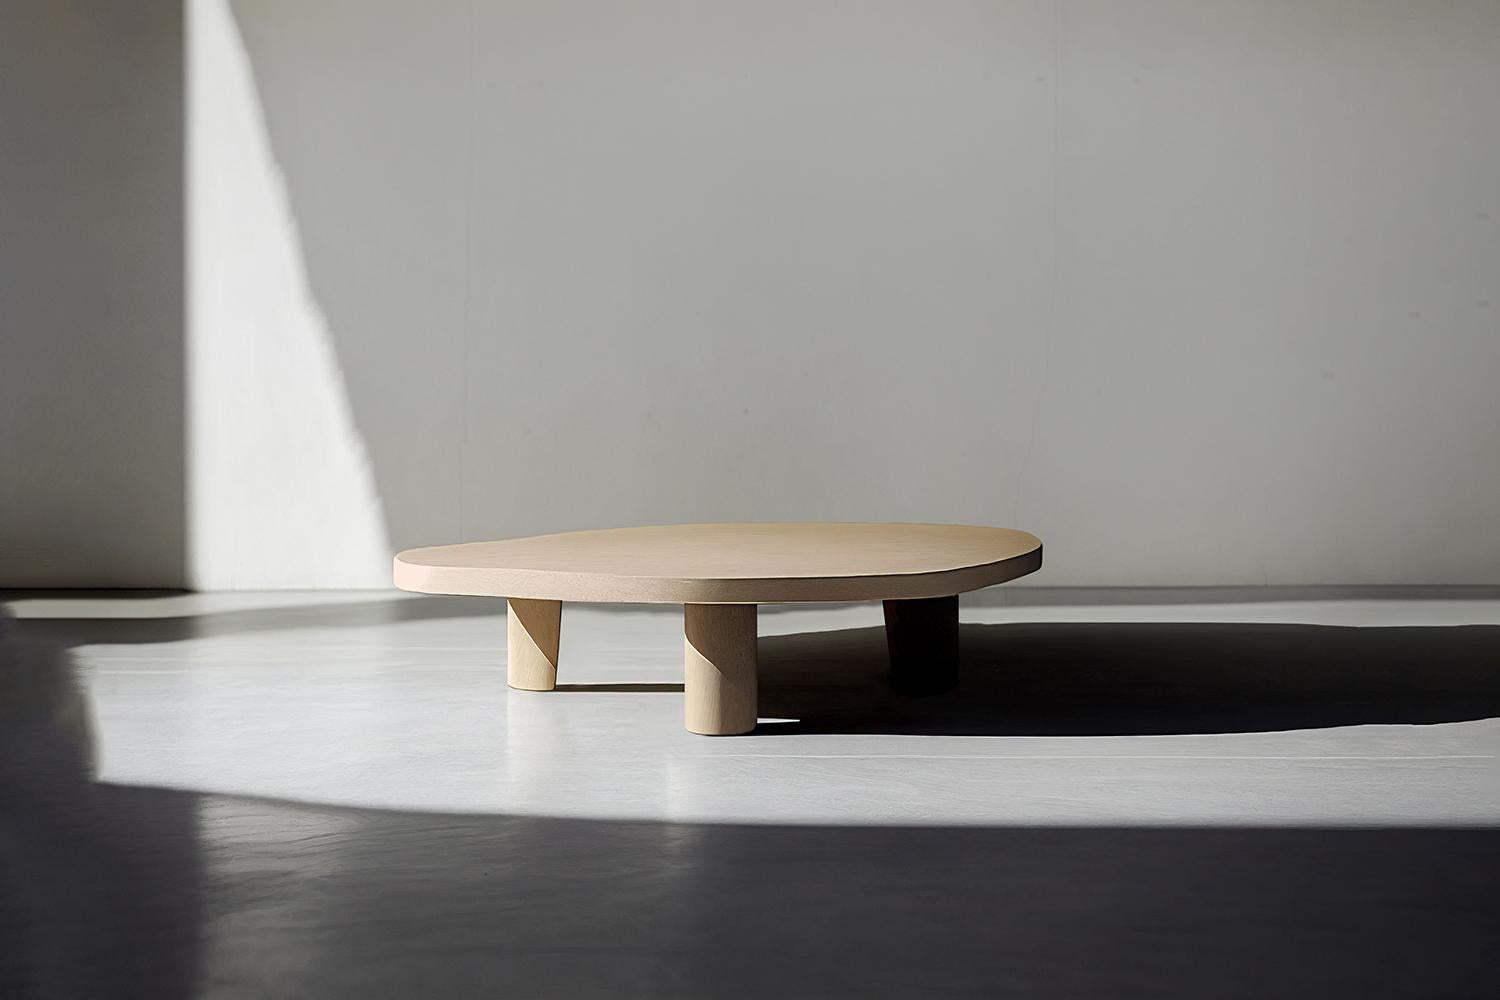 Asimetric coffee table with 4 legs made of solid thick oak.
Product made to order; some variances may apply to the final piece. 

——

NONO is a Mexican design brand with more than 10 years of experience dedicated to the production of interior